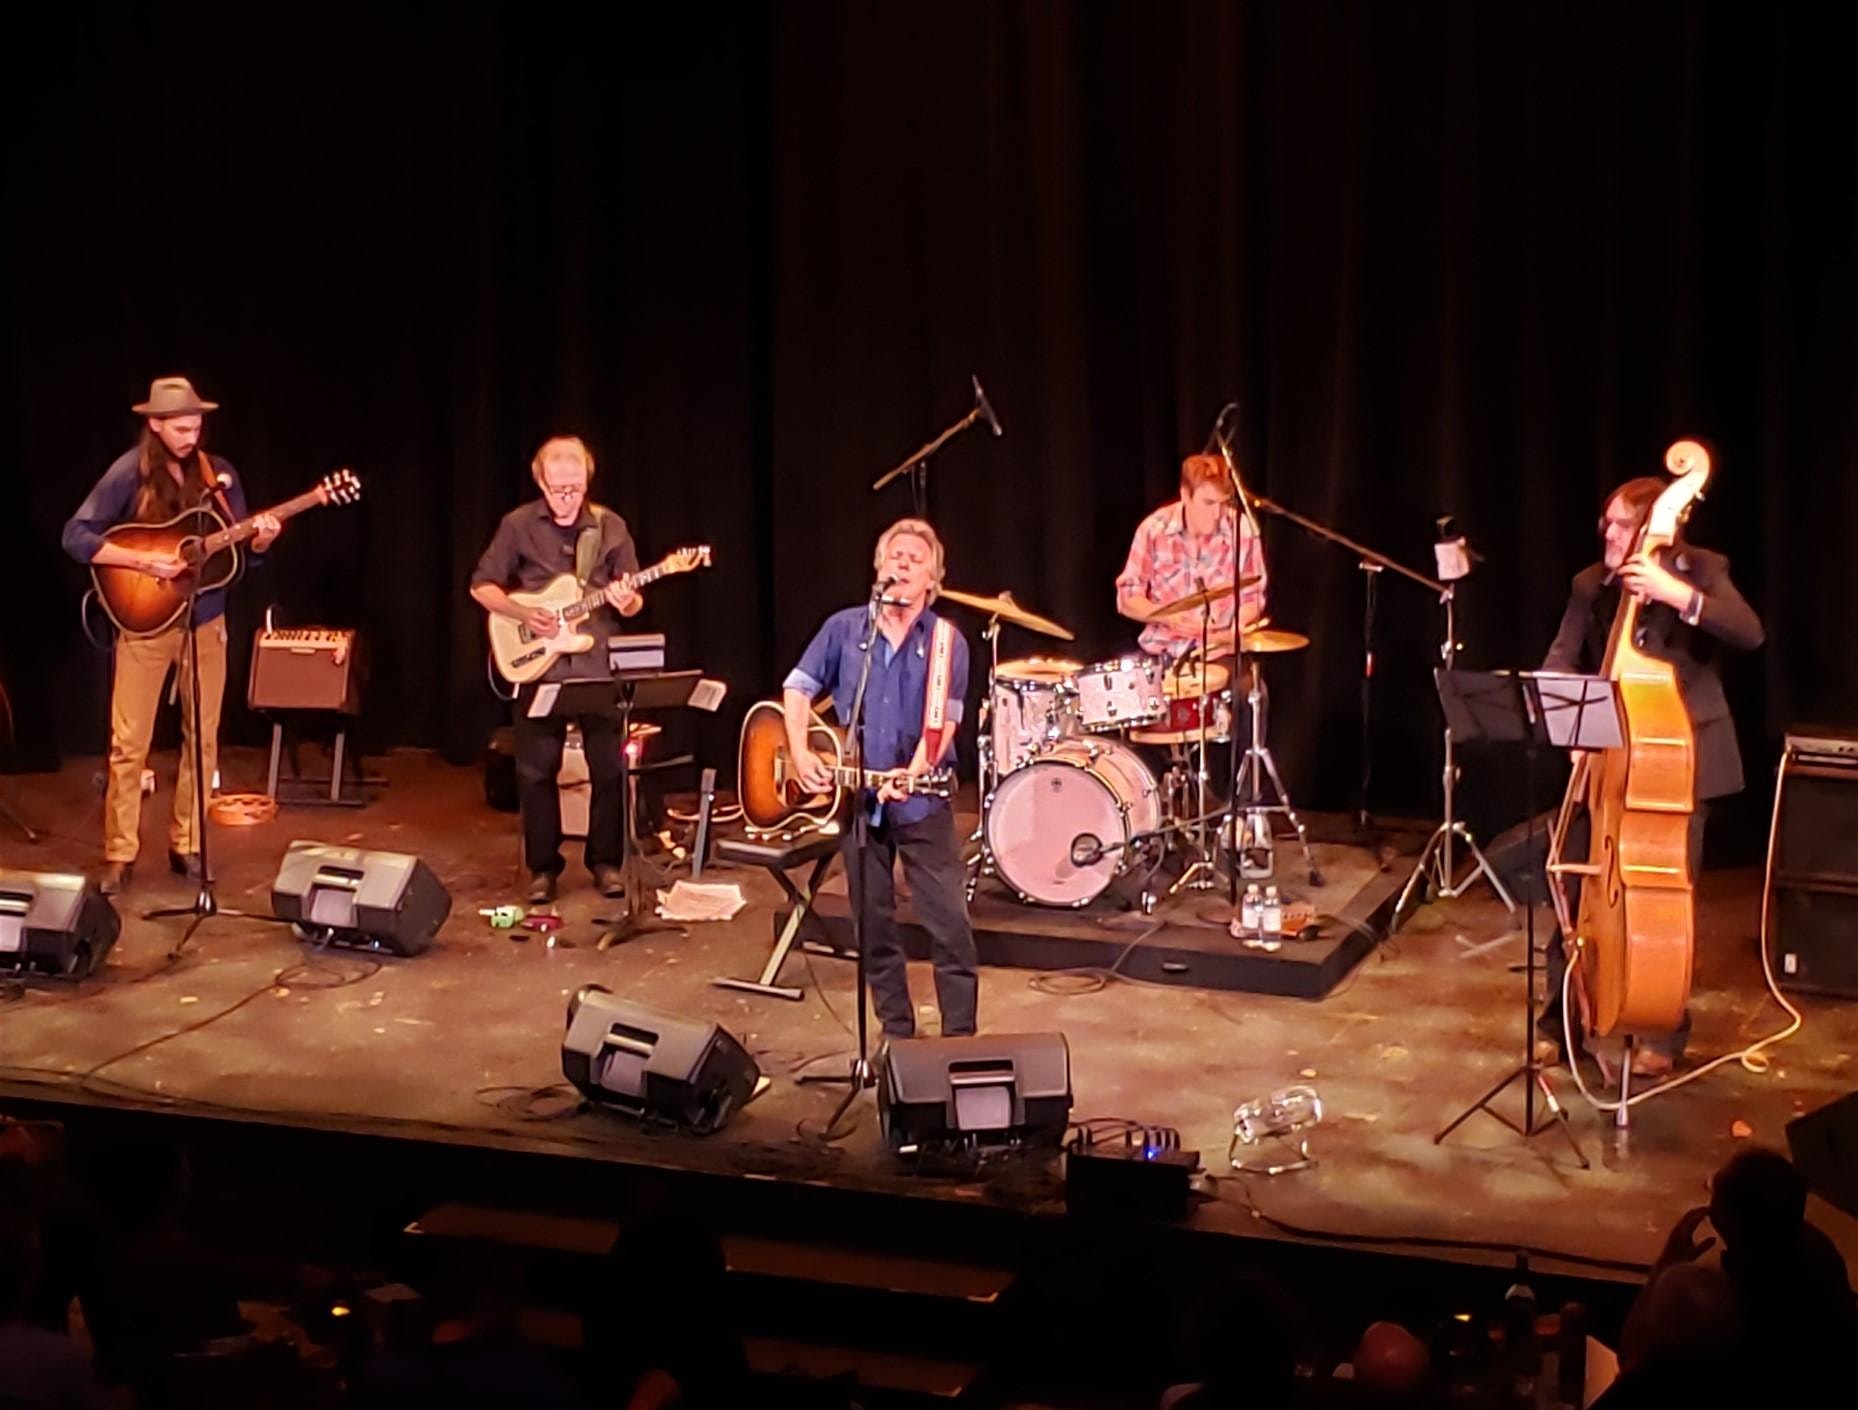 Steve Forbert & The New Renditions (Matinee Show)